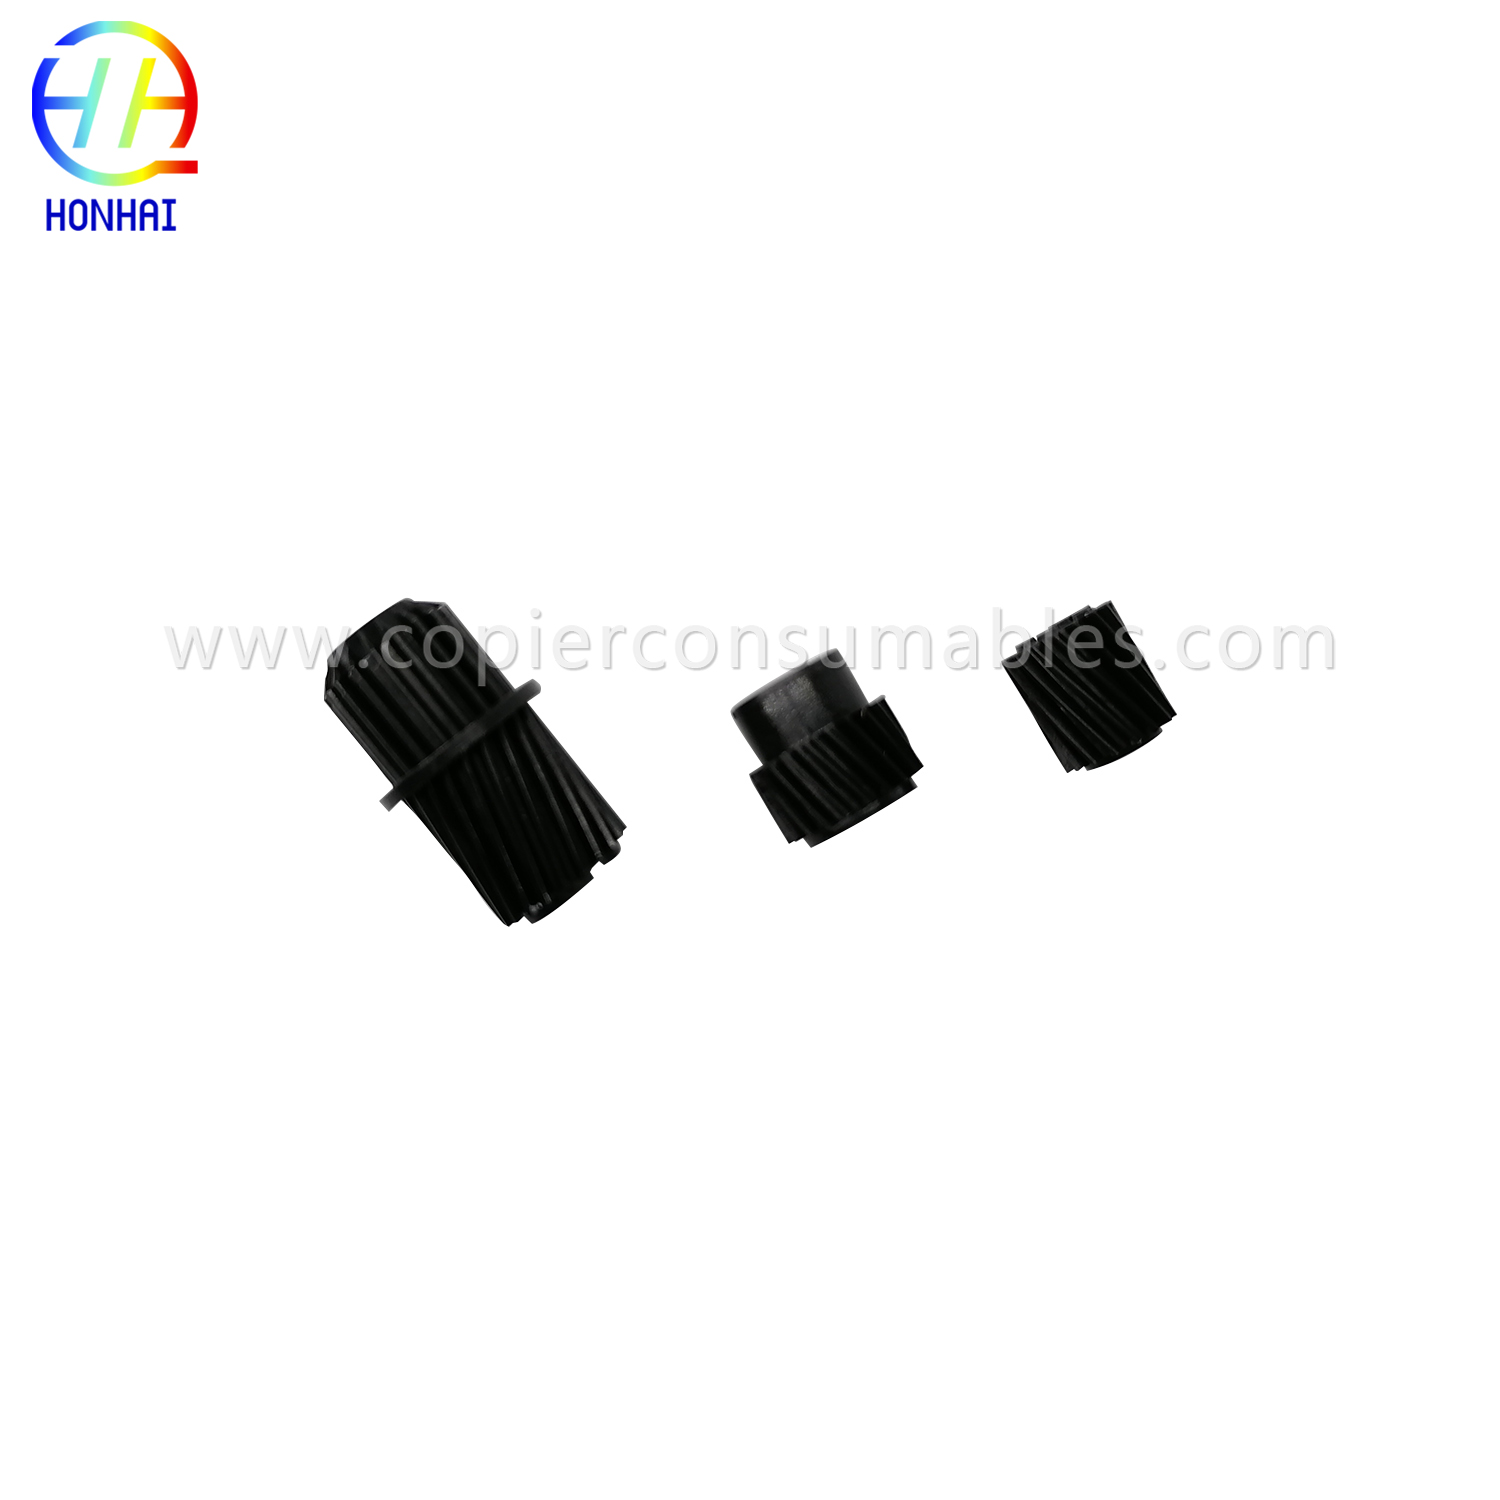 PCU gear kit for Ricoh MPC3003 MPC4503(2) 拷贝